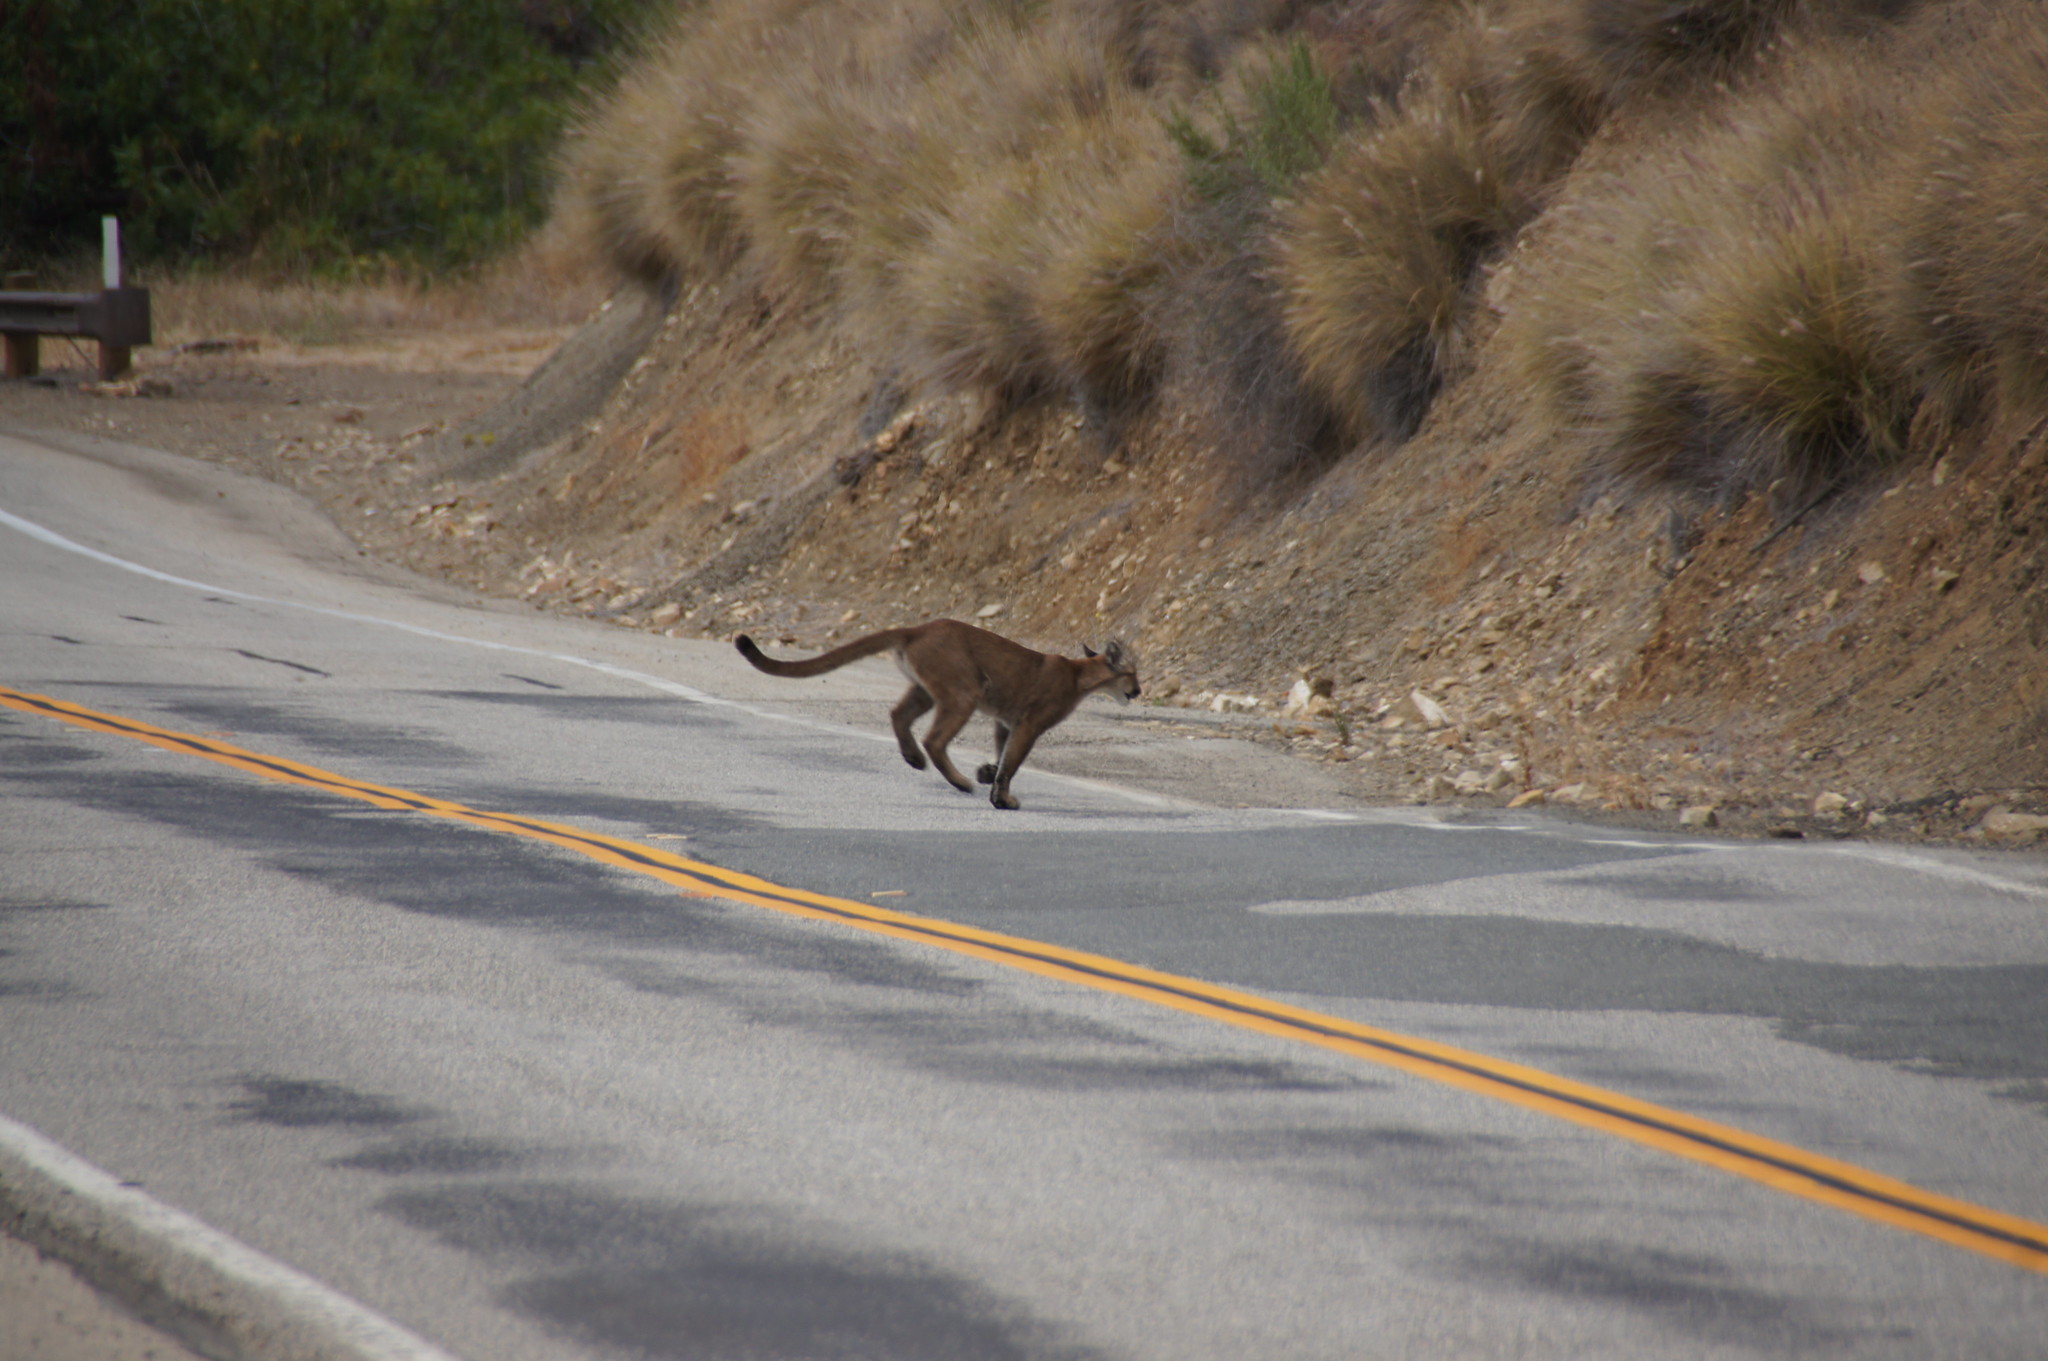 Because of the large range they cover, mountain lions frequently have to cross busy roads.